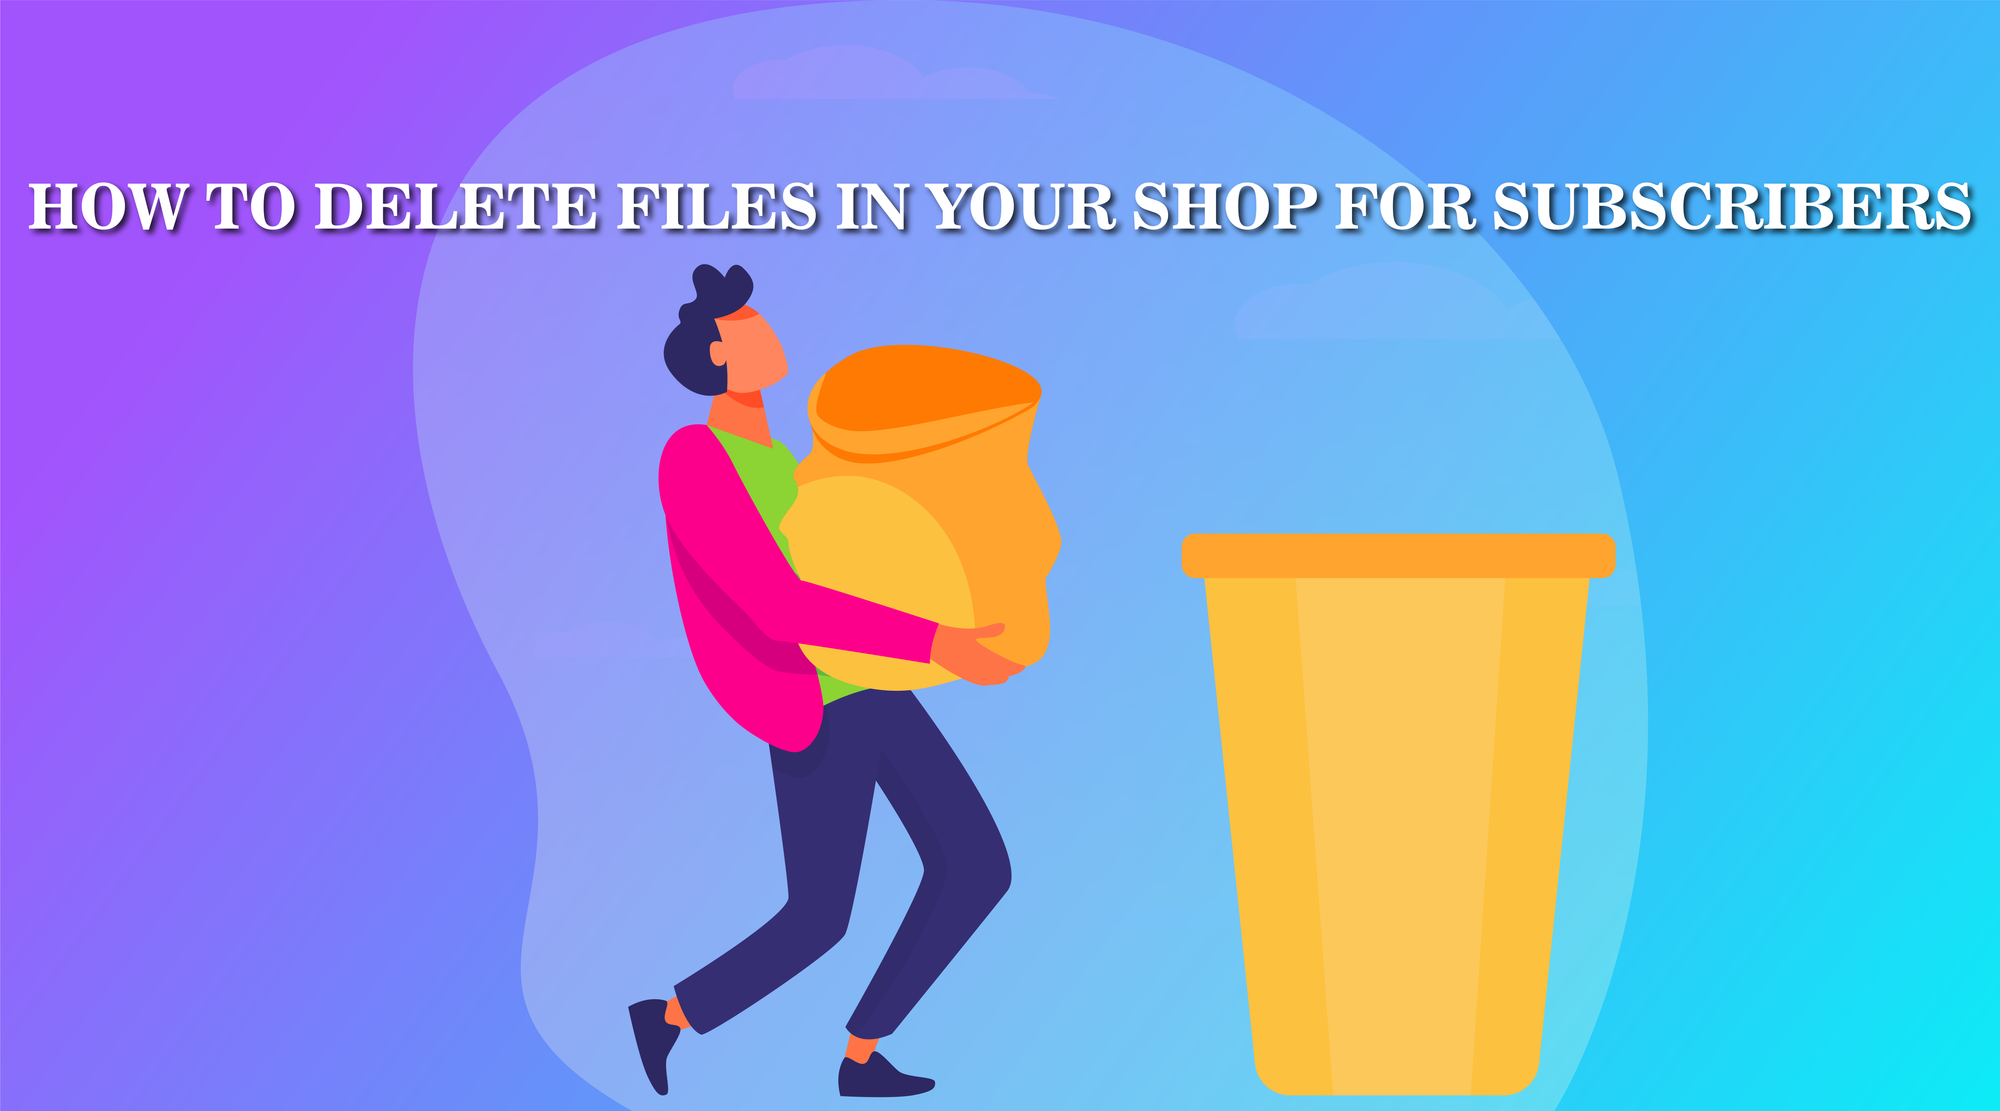 How to Delete Files in your Shop for Subscribers